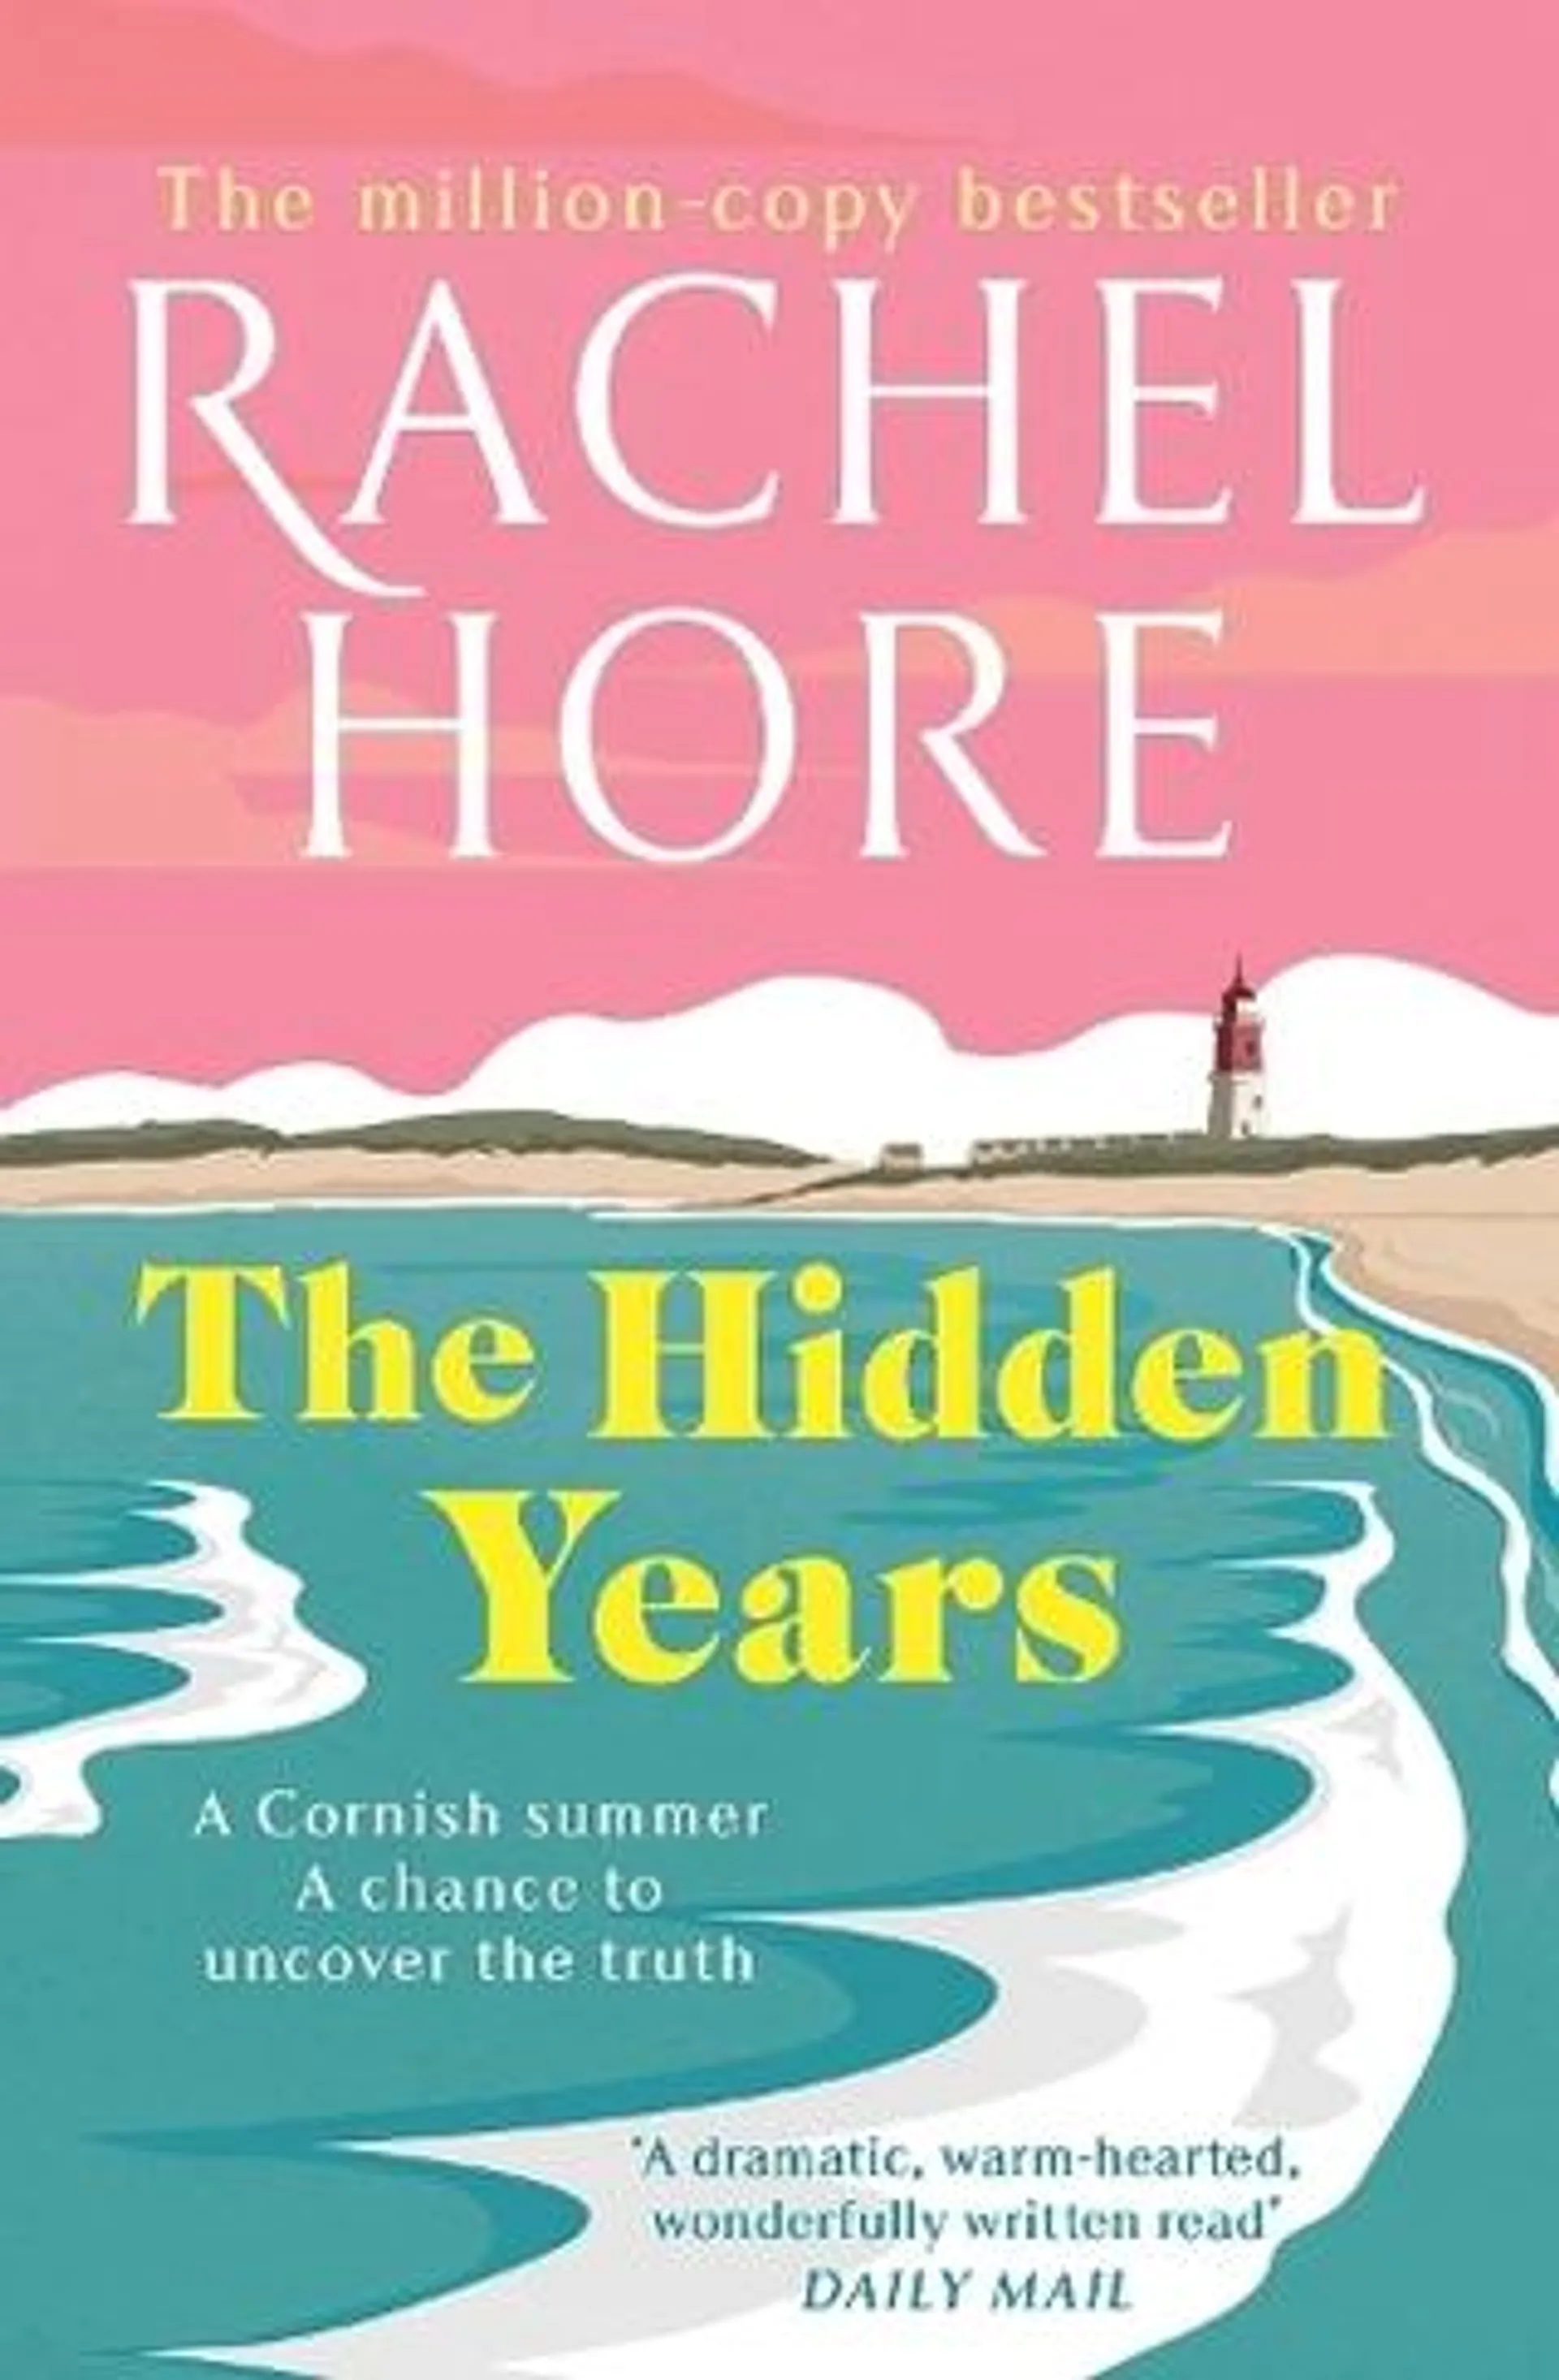 The Hidden Years: Discover the captivating new novel from the million-copy bestseller Rachel Hore.